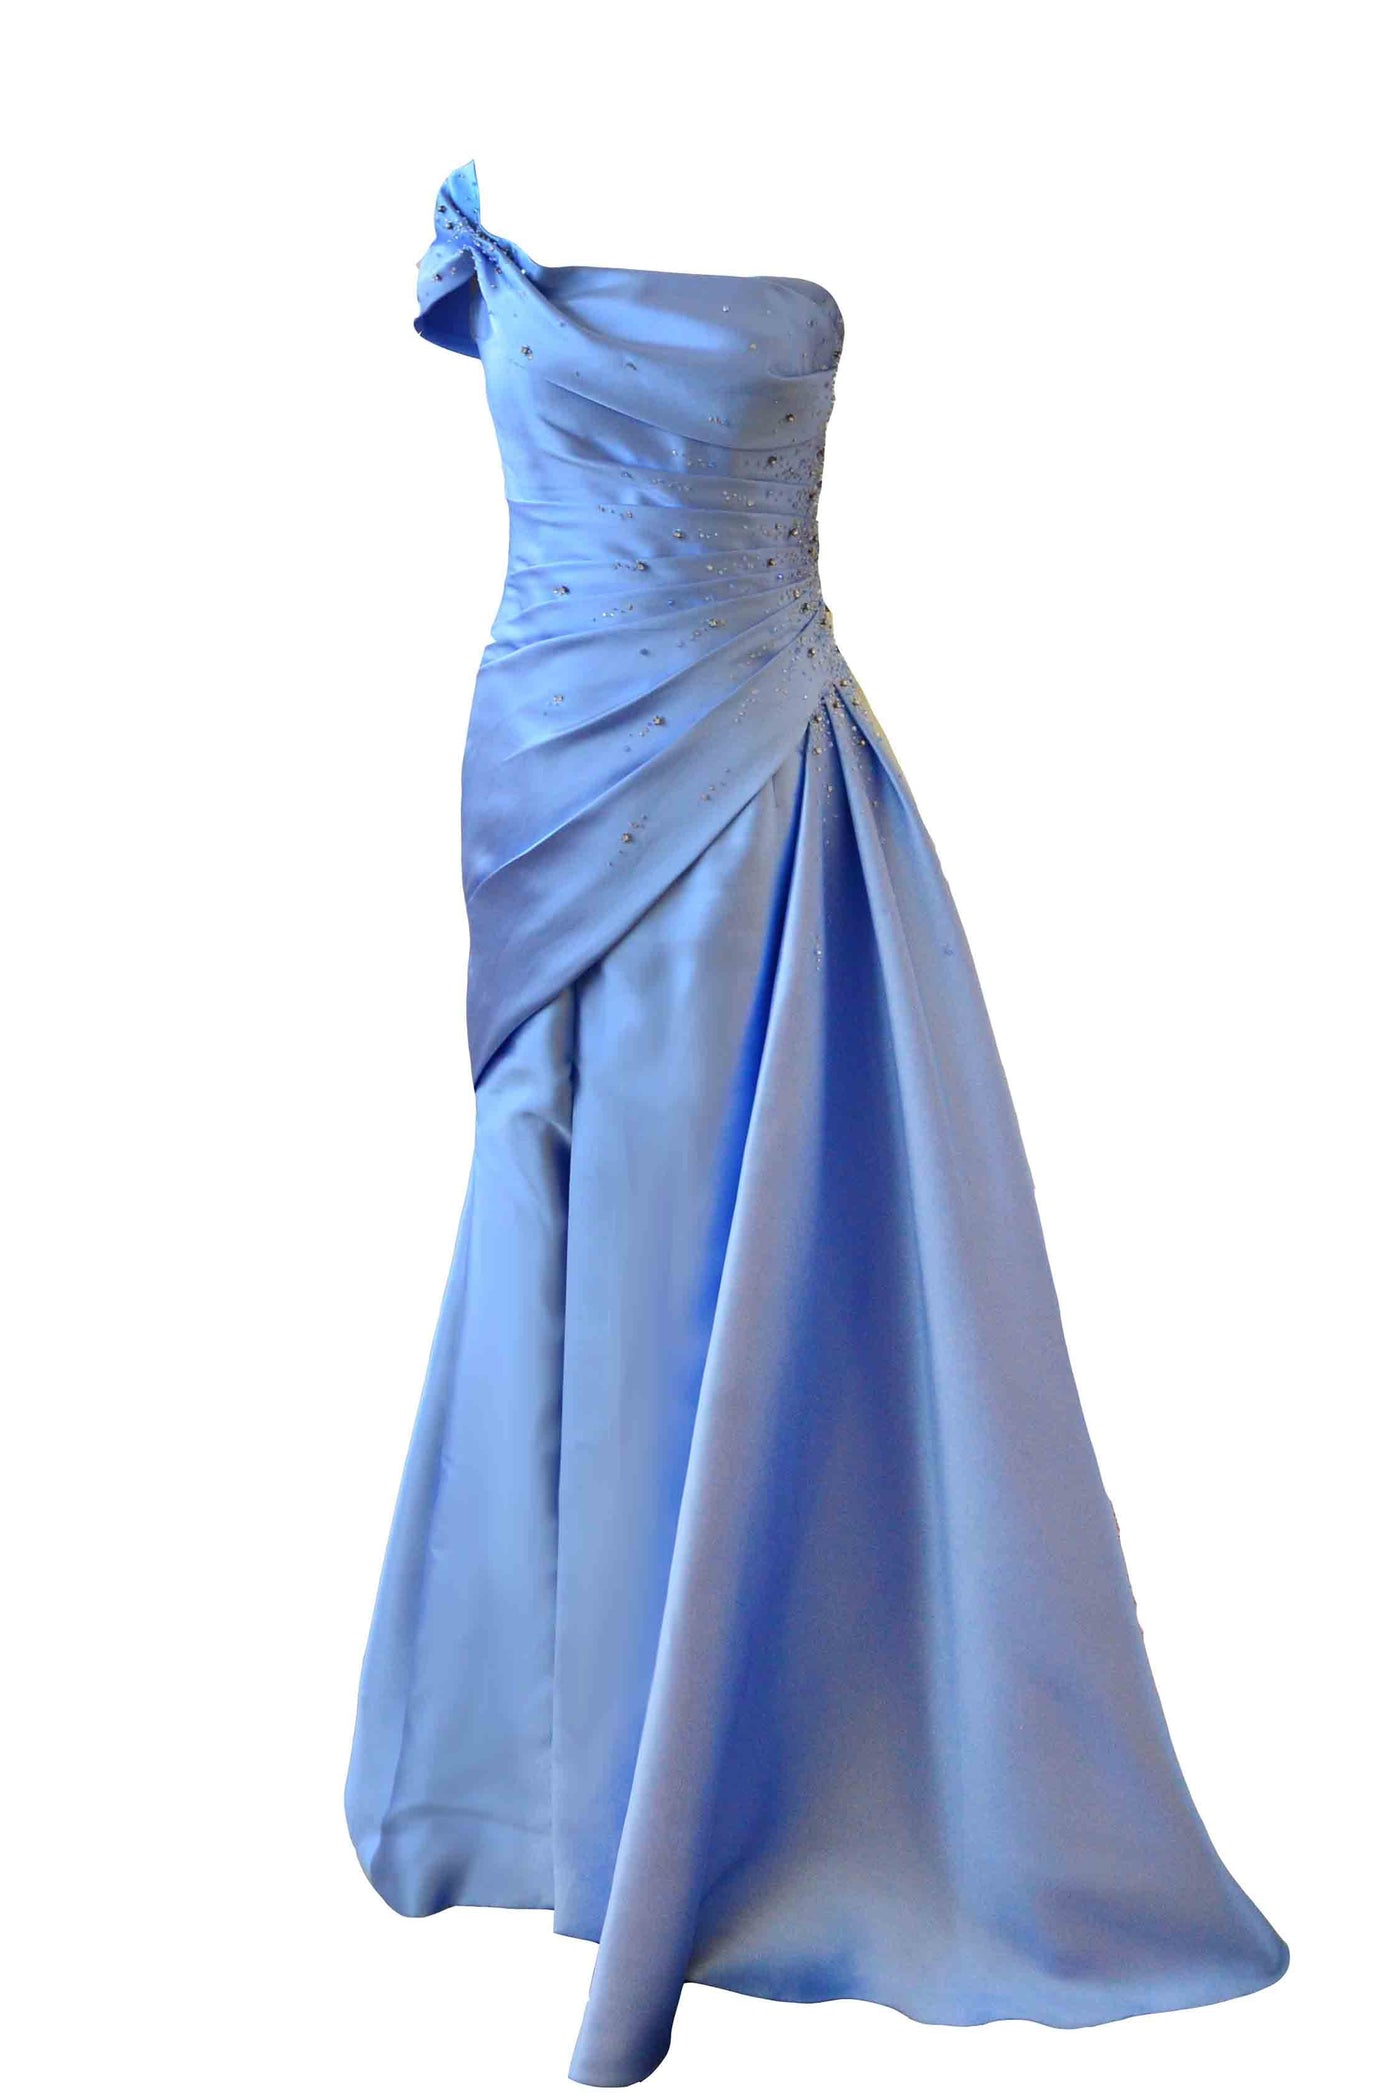 Rent: Anrini Polim - One Shoulder Blue Strapless Satin Gown with Bow